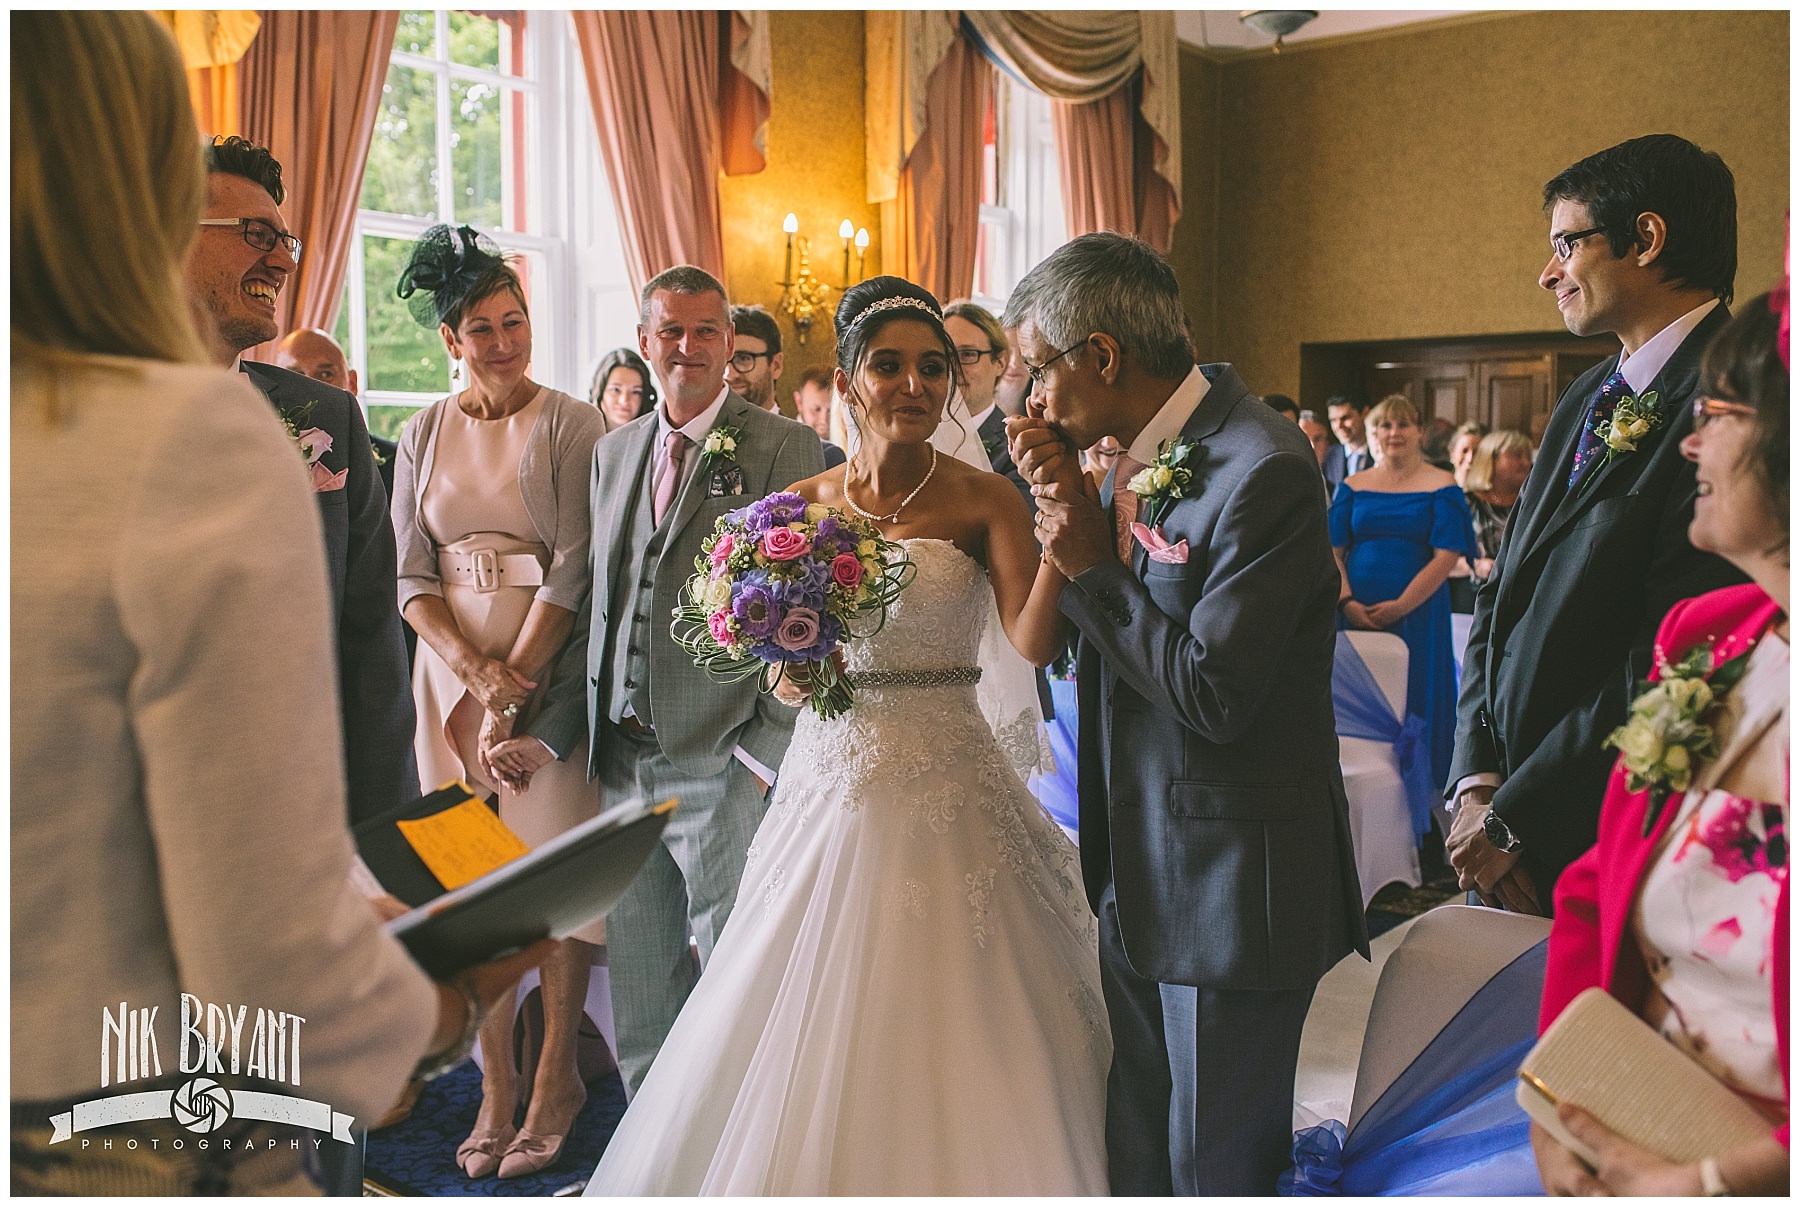 Father kisses his daughters hand as he hands her to the groom at shrigley hall wedding